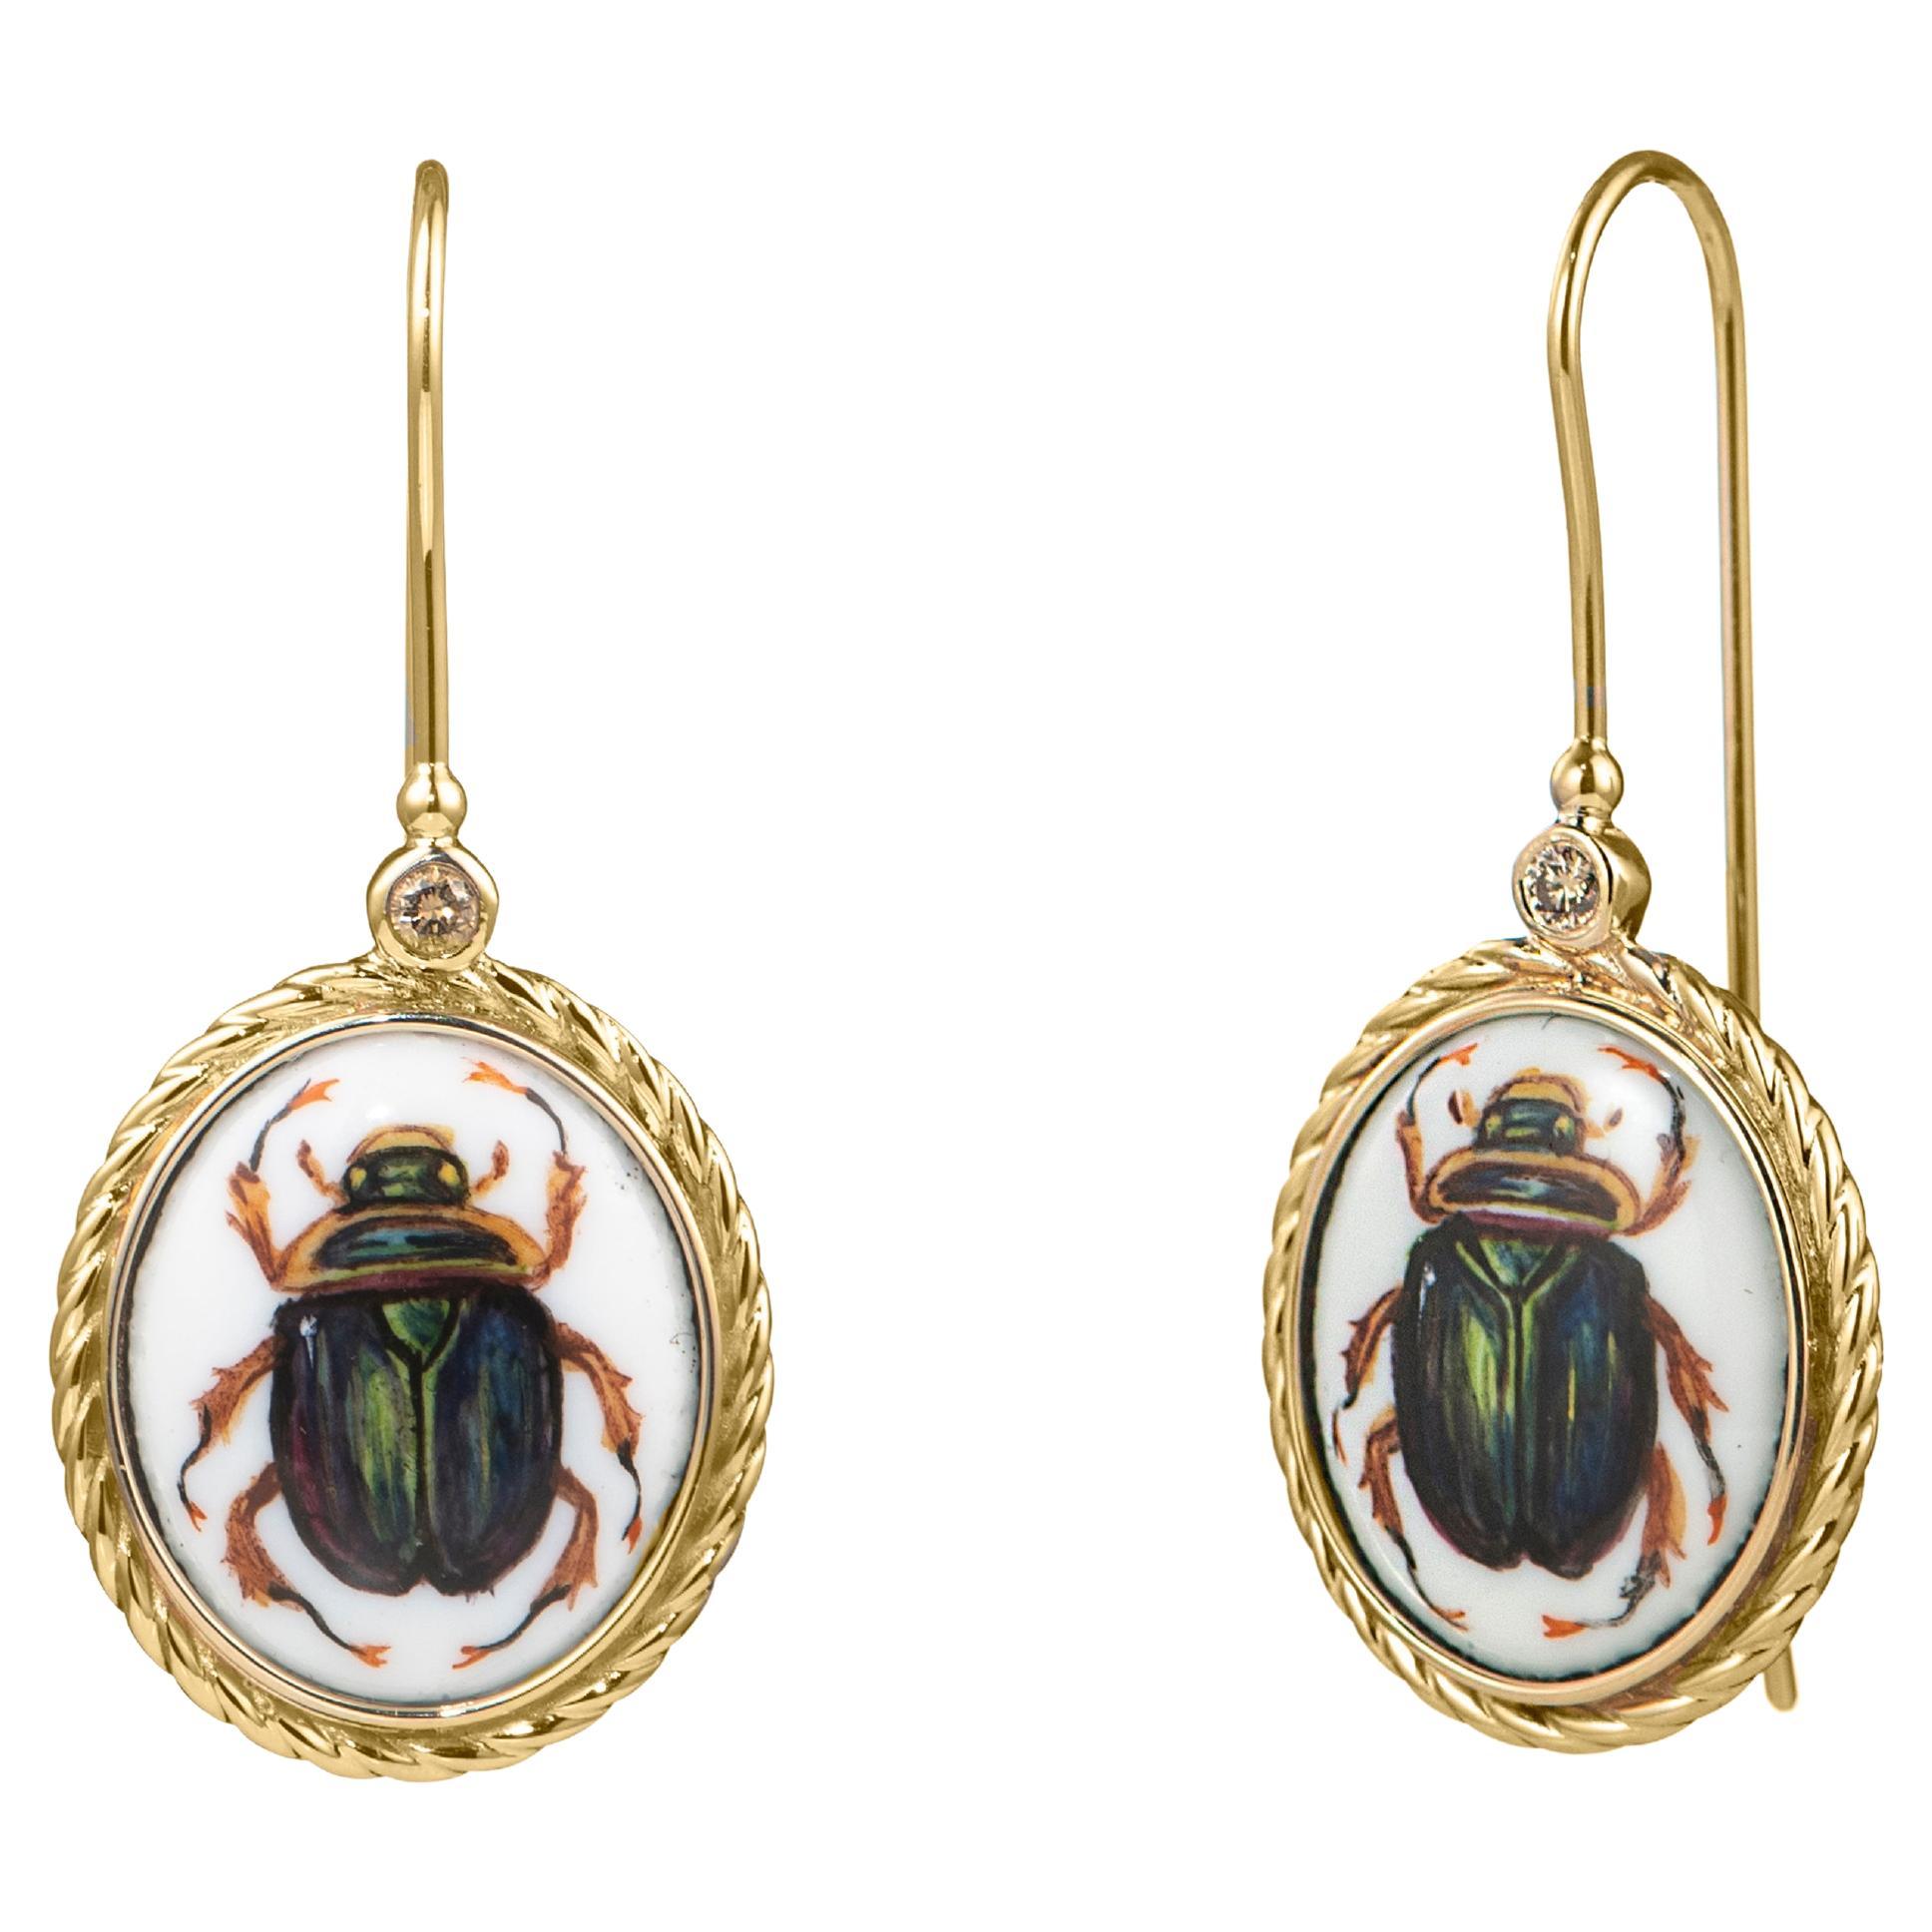 What is the meaning of scarab jewelry?